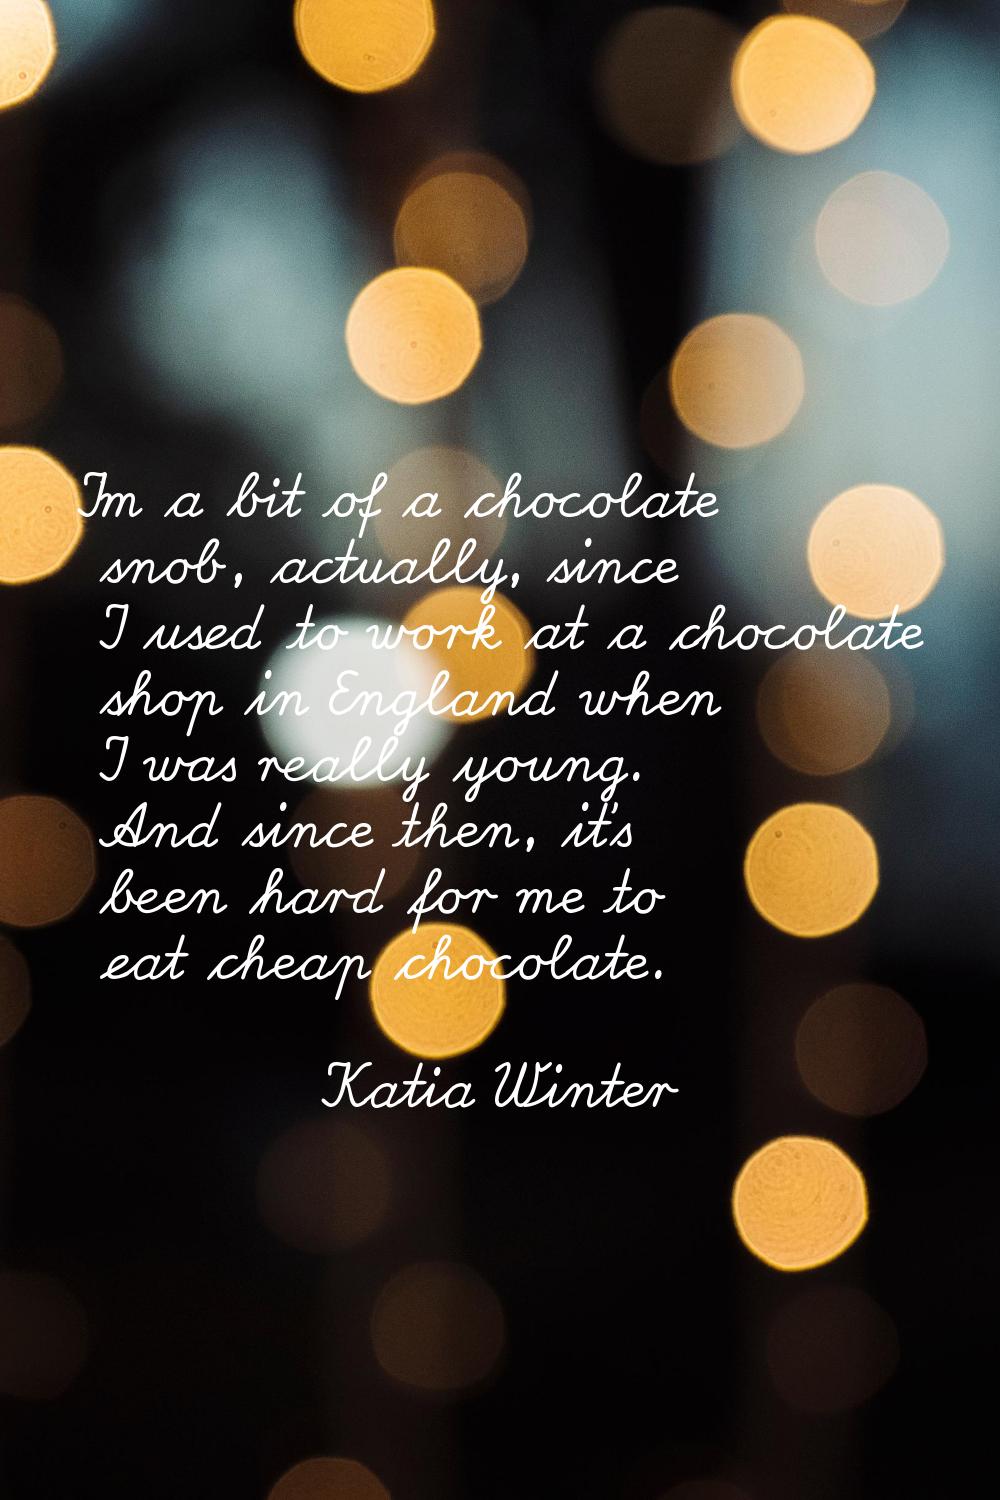 I'm a bit of a chocolate snob, actually, since I used to work at a chocolate shop in England when I